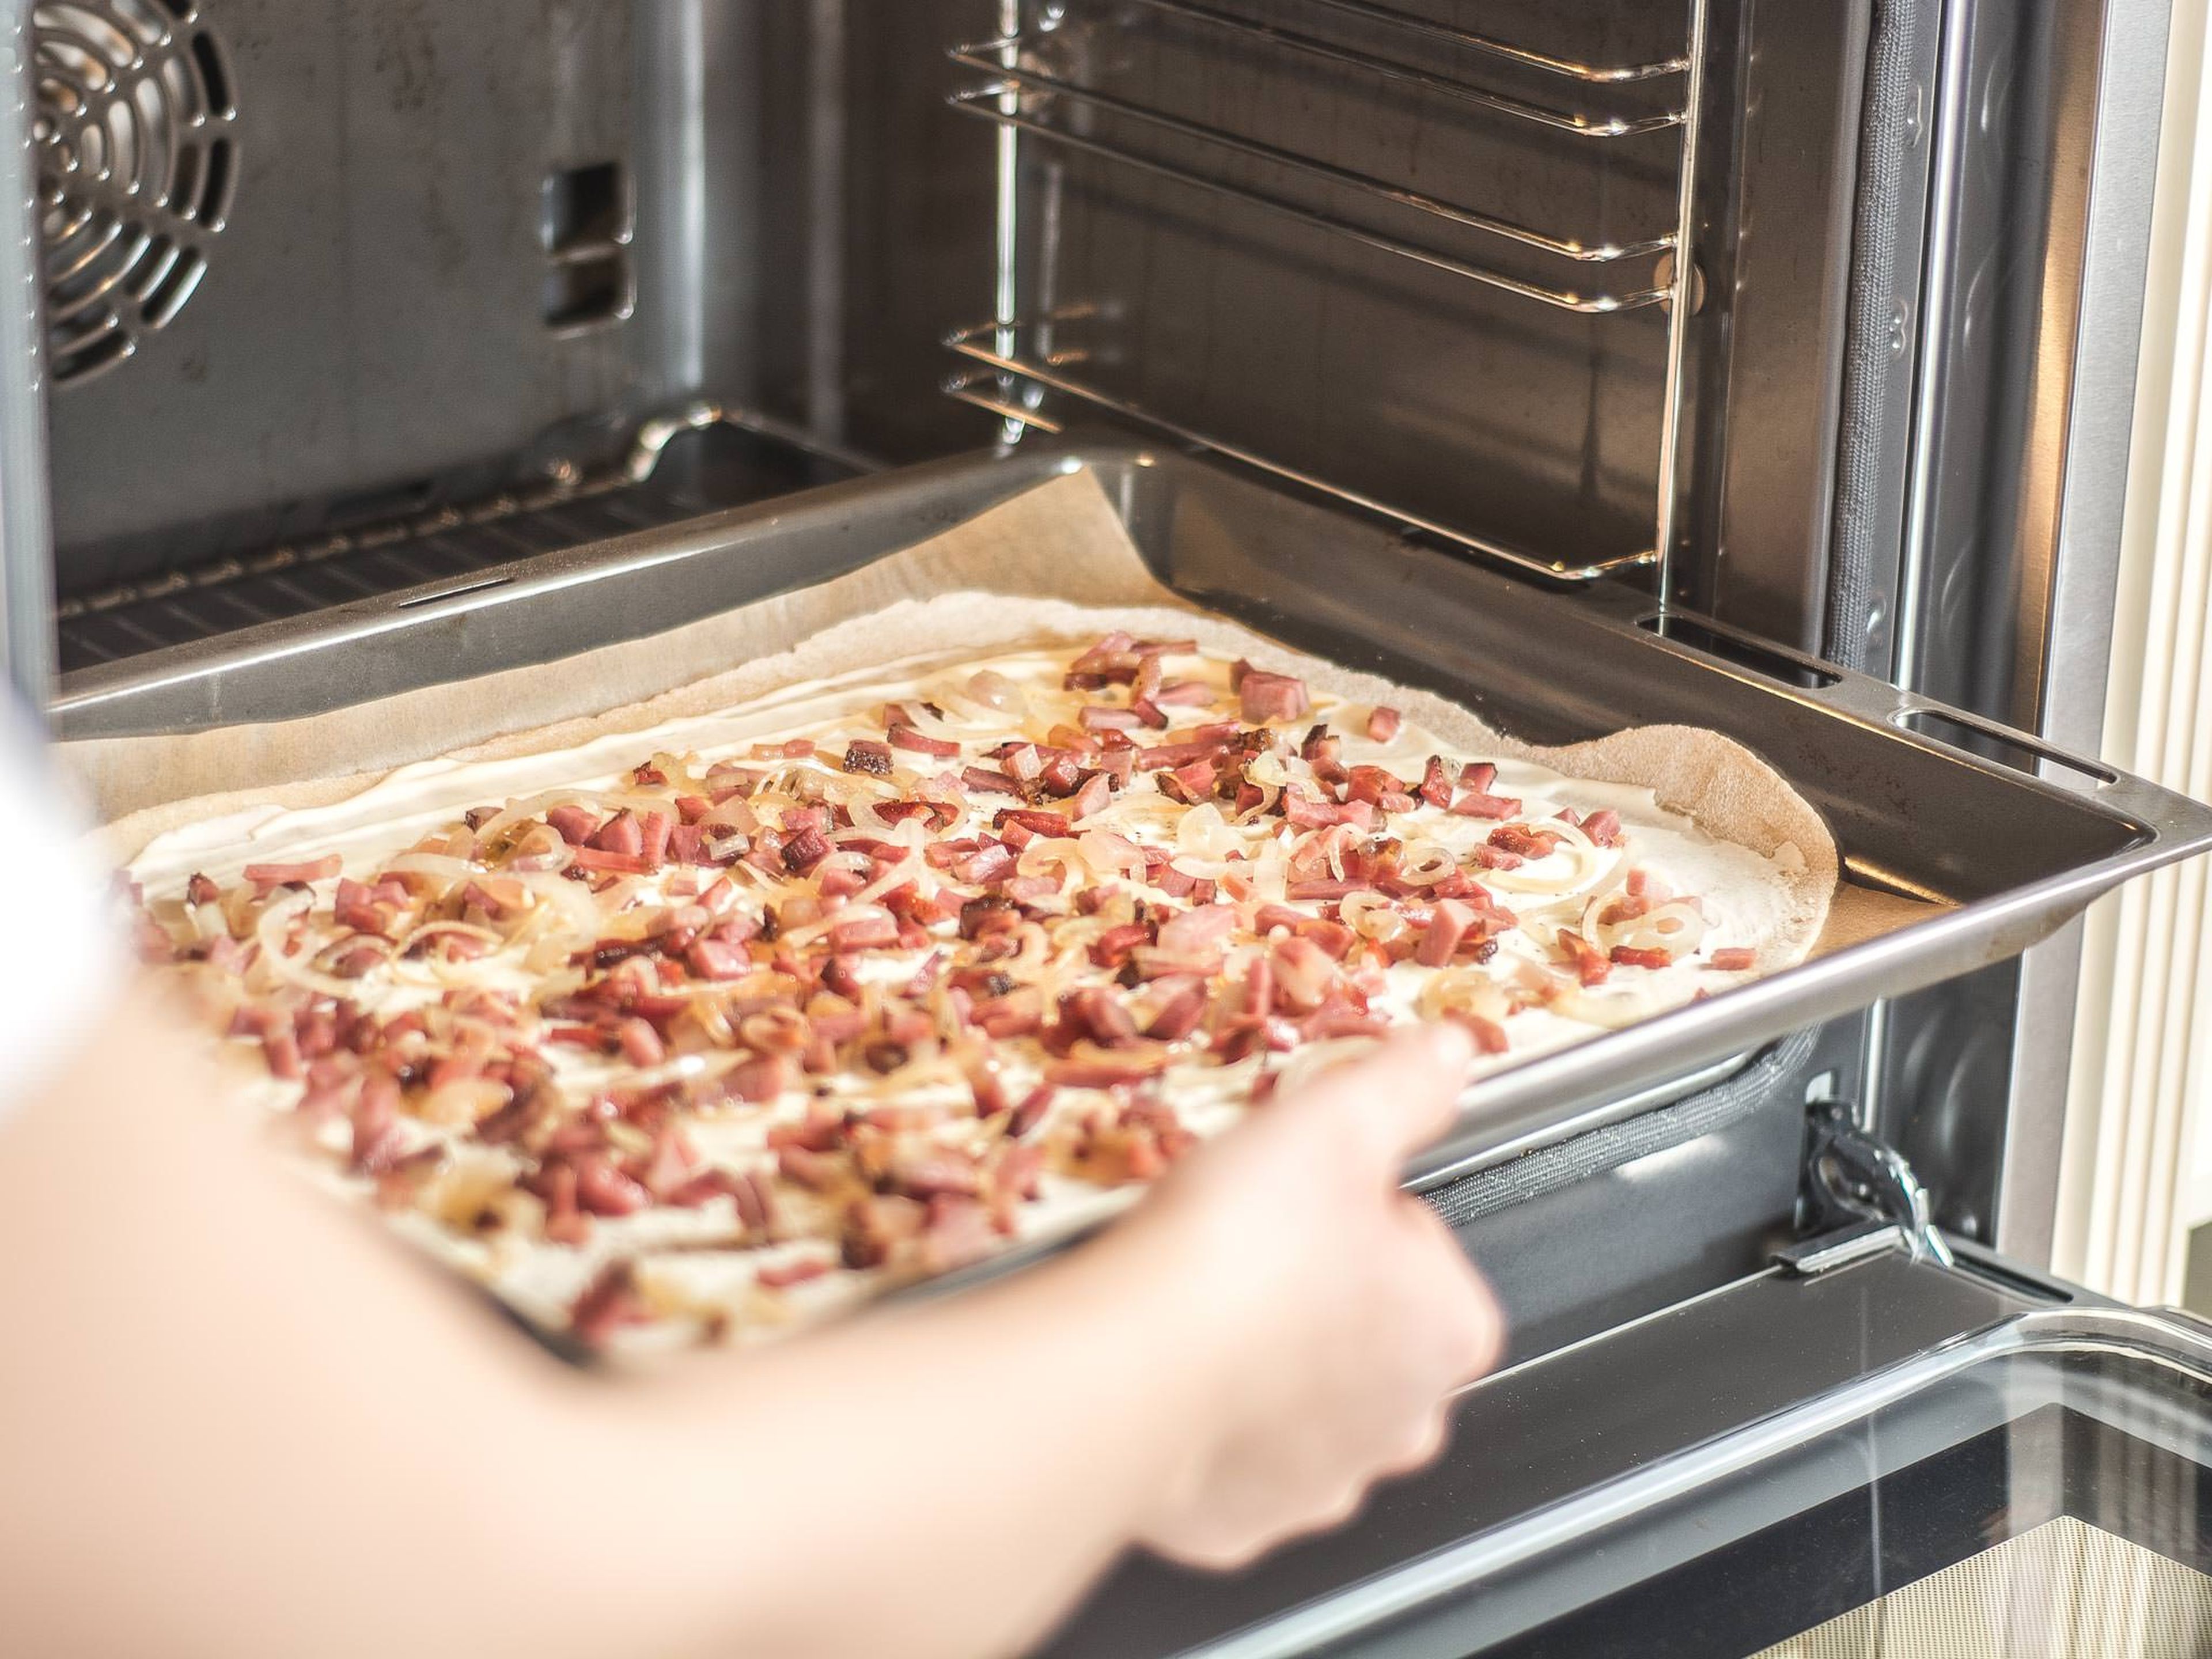 Bake in a preheated oven at 240°C/ 465°F for approx. 15 – 20 min. until golden brown. Sprinkle chives on top before serving and enjoy straight from the oven.